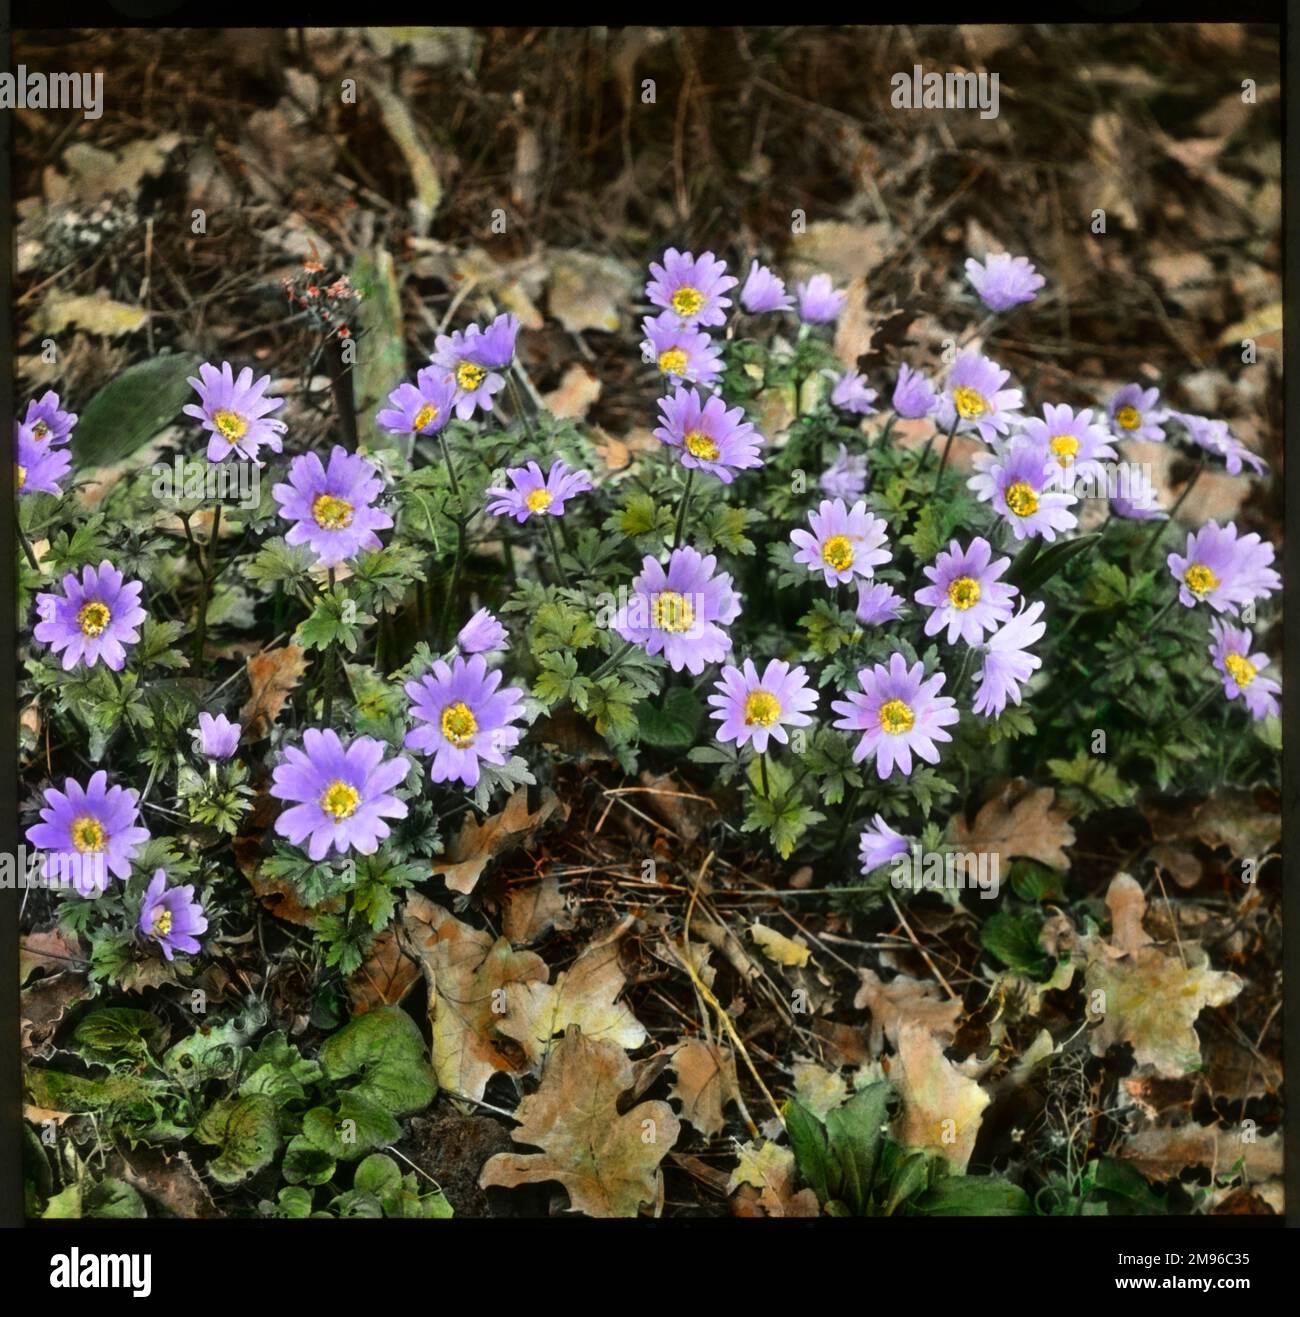 Anemone Blanda, also known as Windflower, with a daisy-like mauve flower. Stock Photo